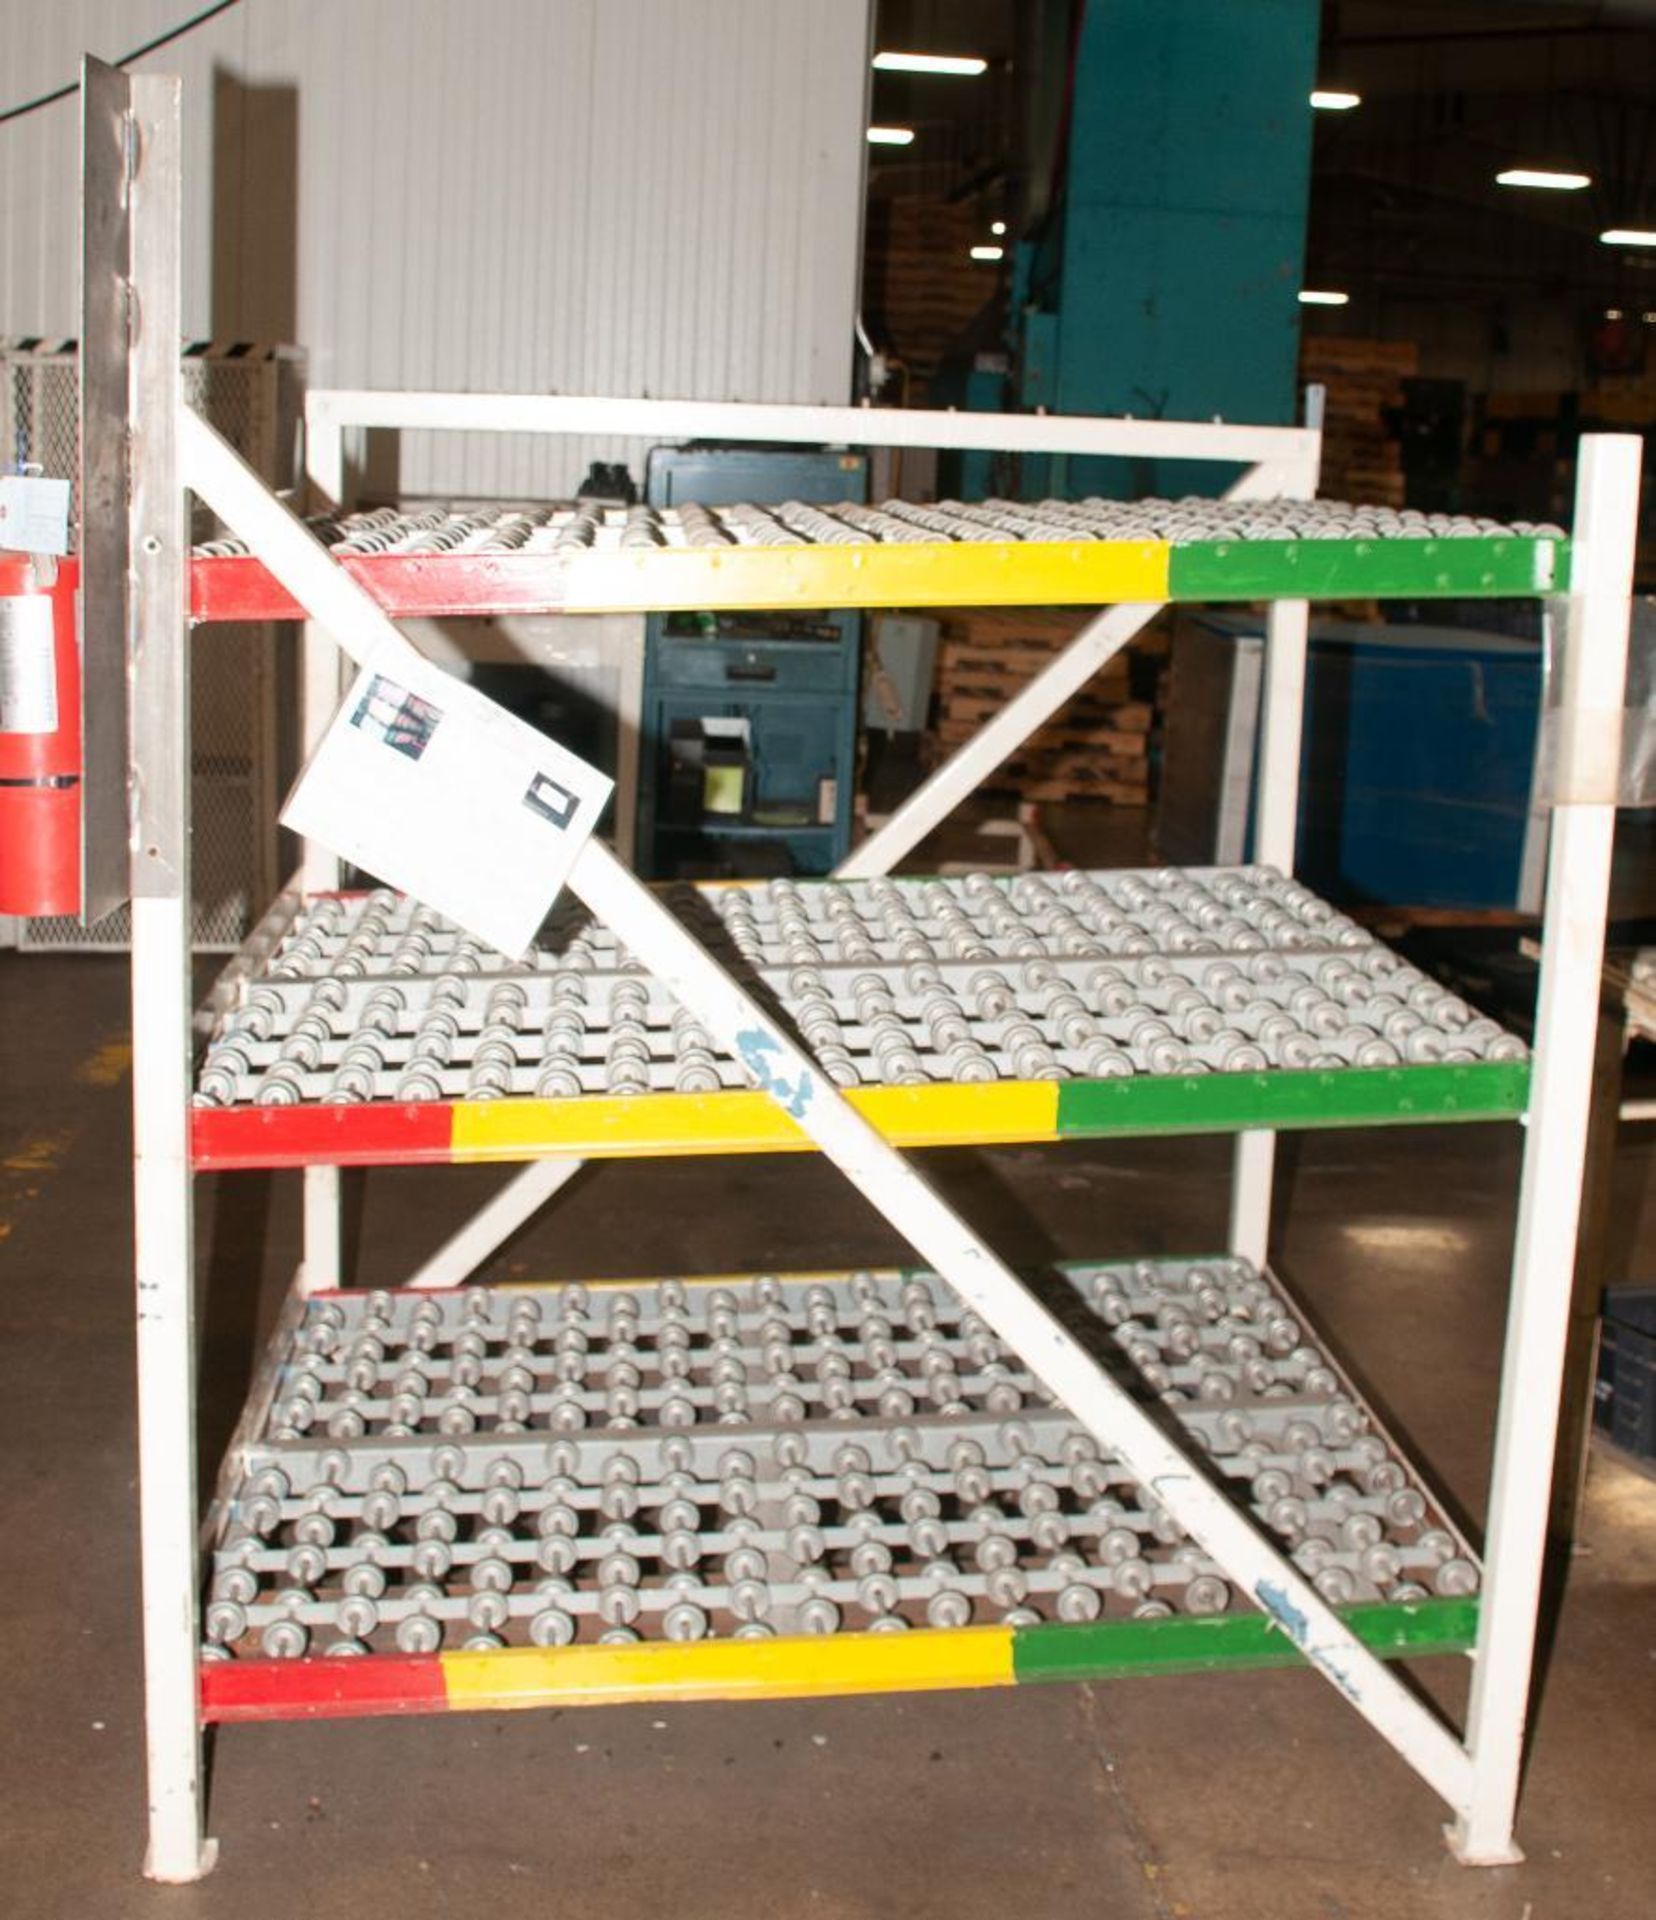 (6) Incline Wheel Conveyors, double wide x 3 rows tall, On Steel Stand Approx 52"W x 60 1/2" Long - Image 2 of 3